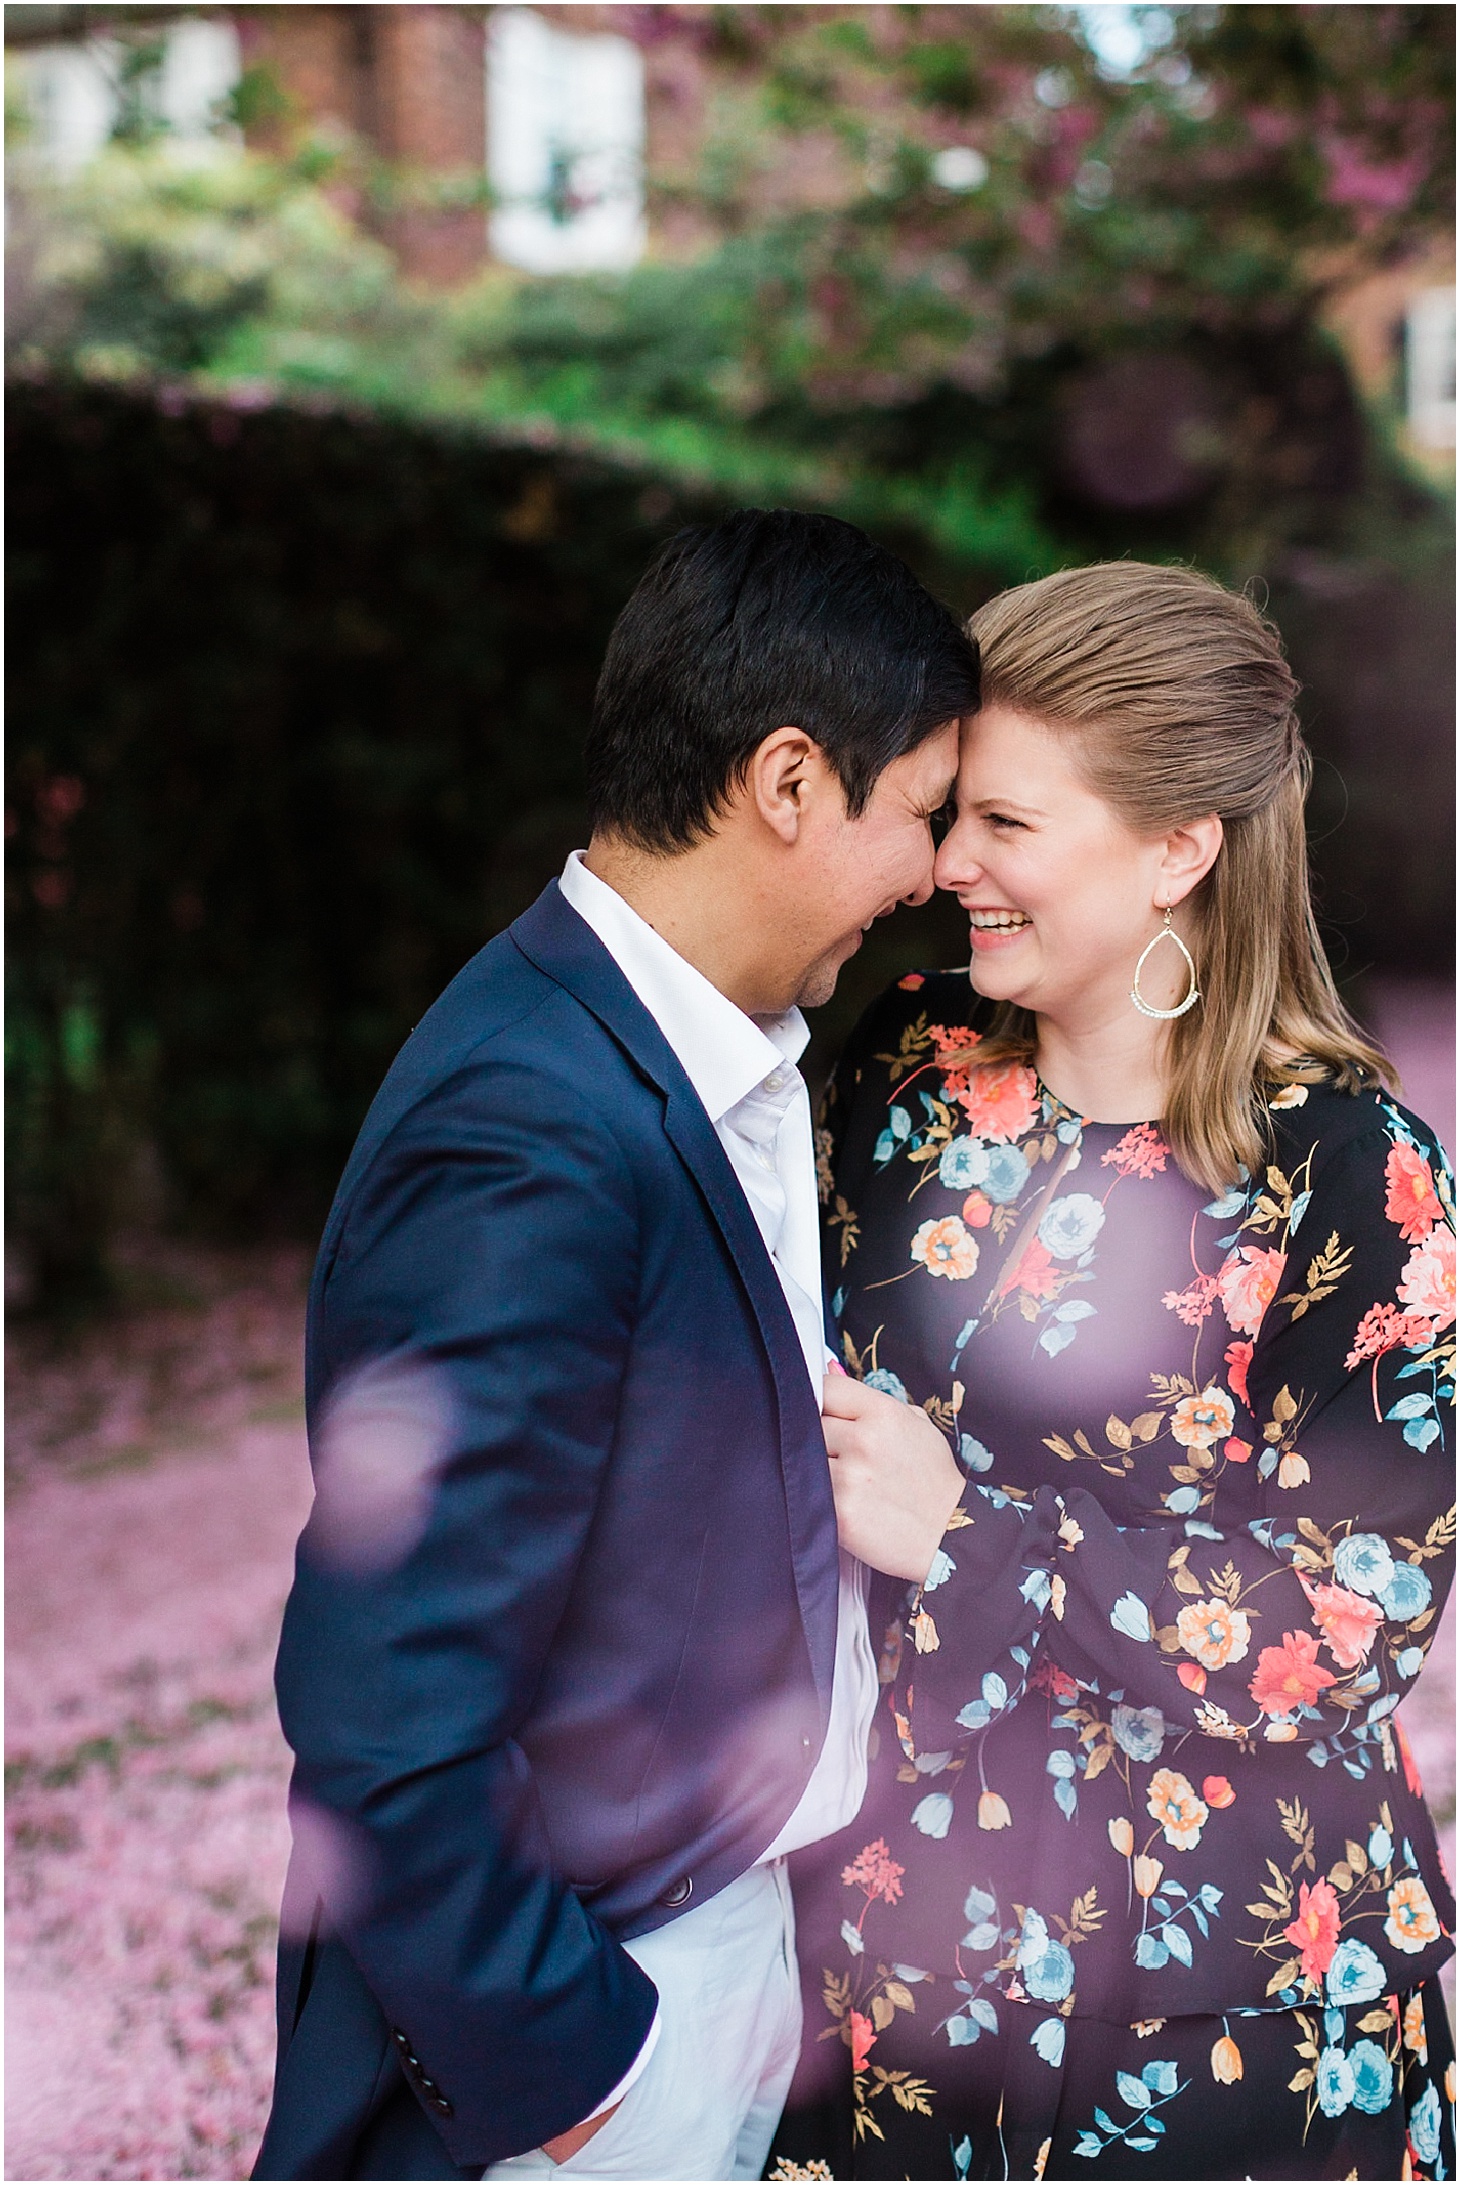 Engagement Portraits with Cherry Blossoms in NYC, Springtime Engagement in Queens NYC, Sarah Bradshaw Photography